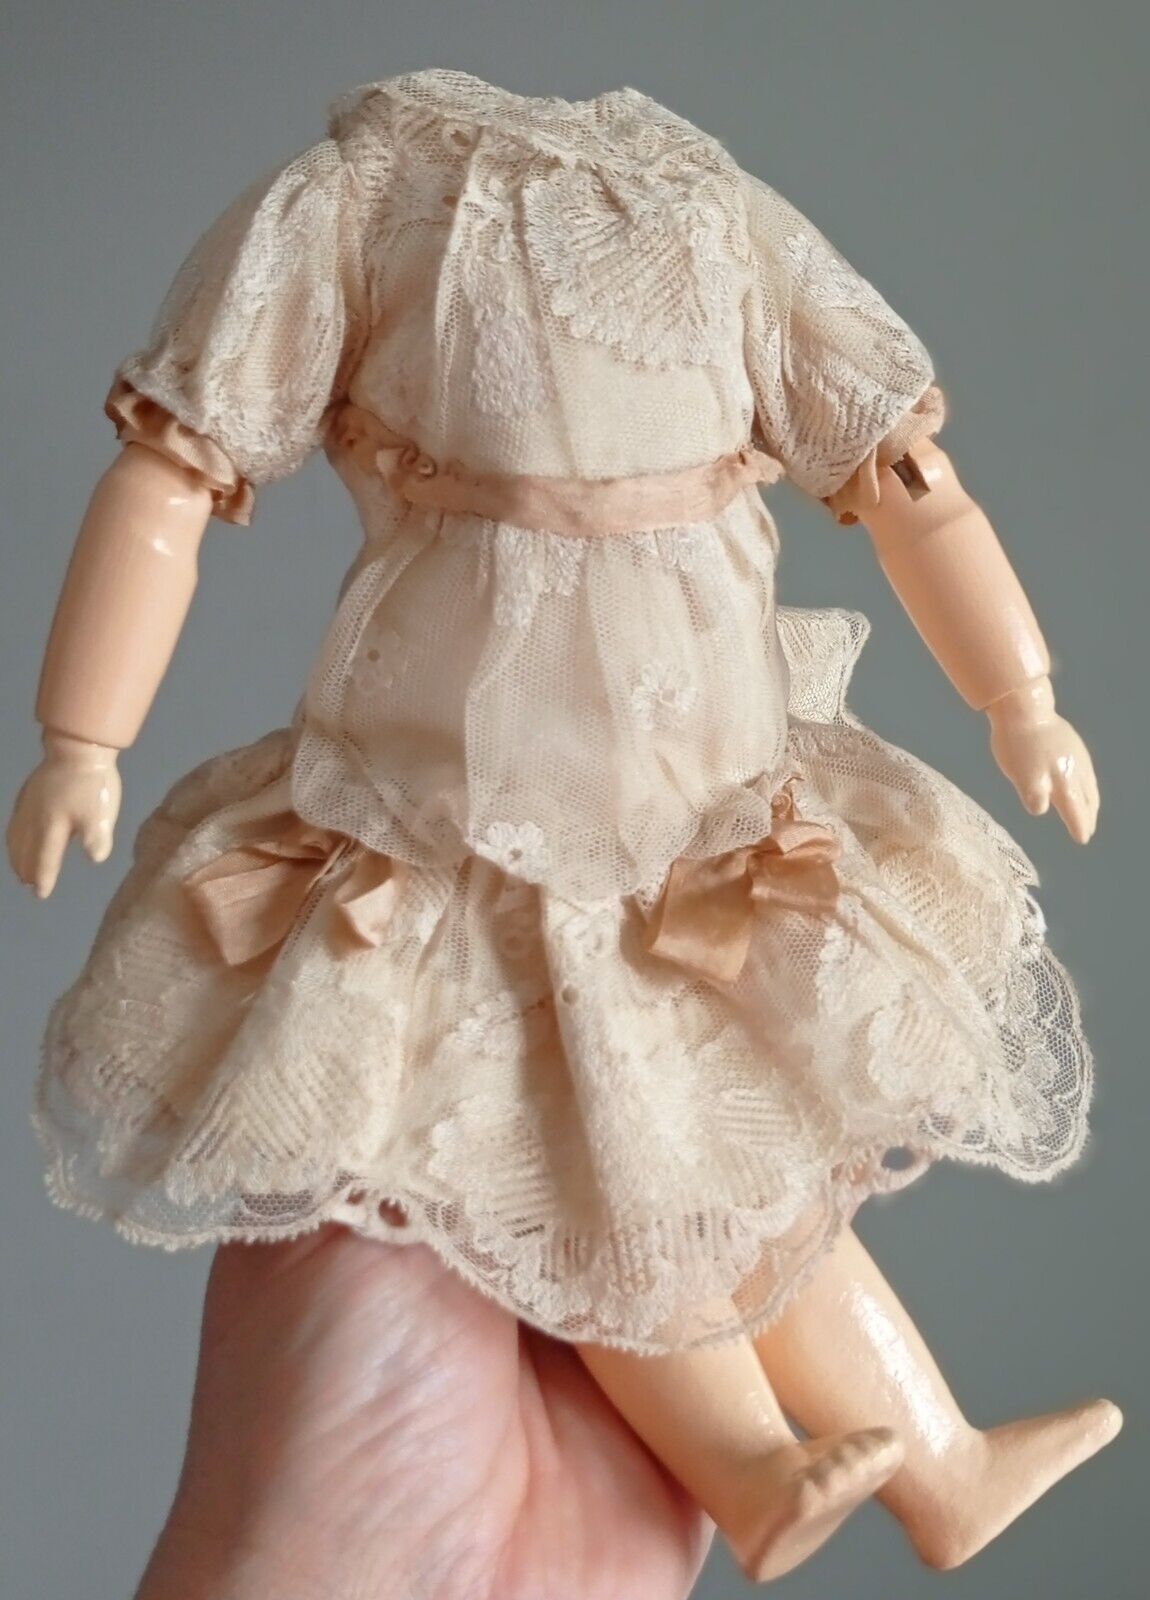 Vintage/antique doll body, wooden, dressed in a lacy dress